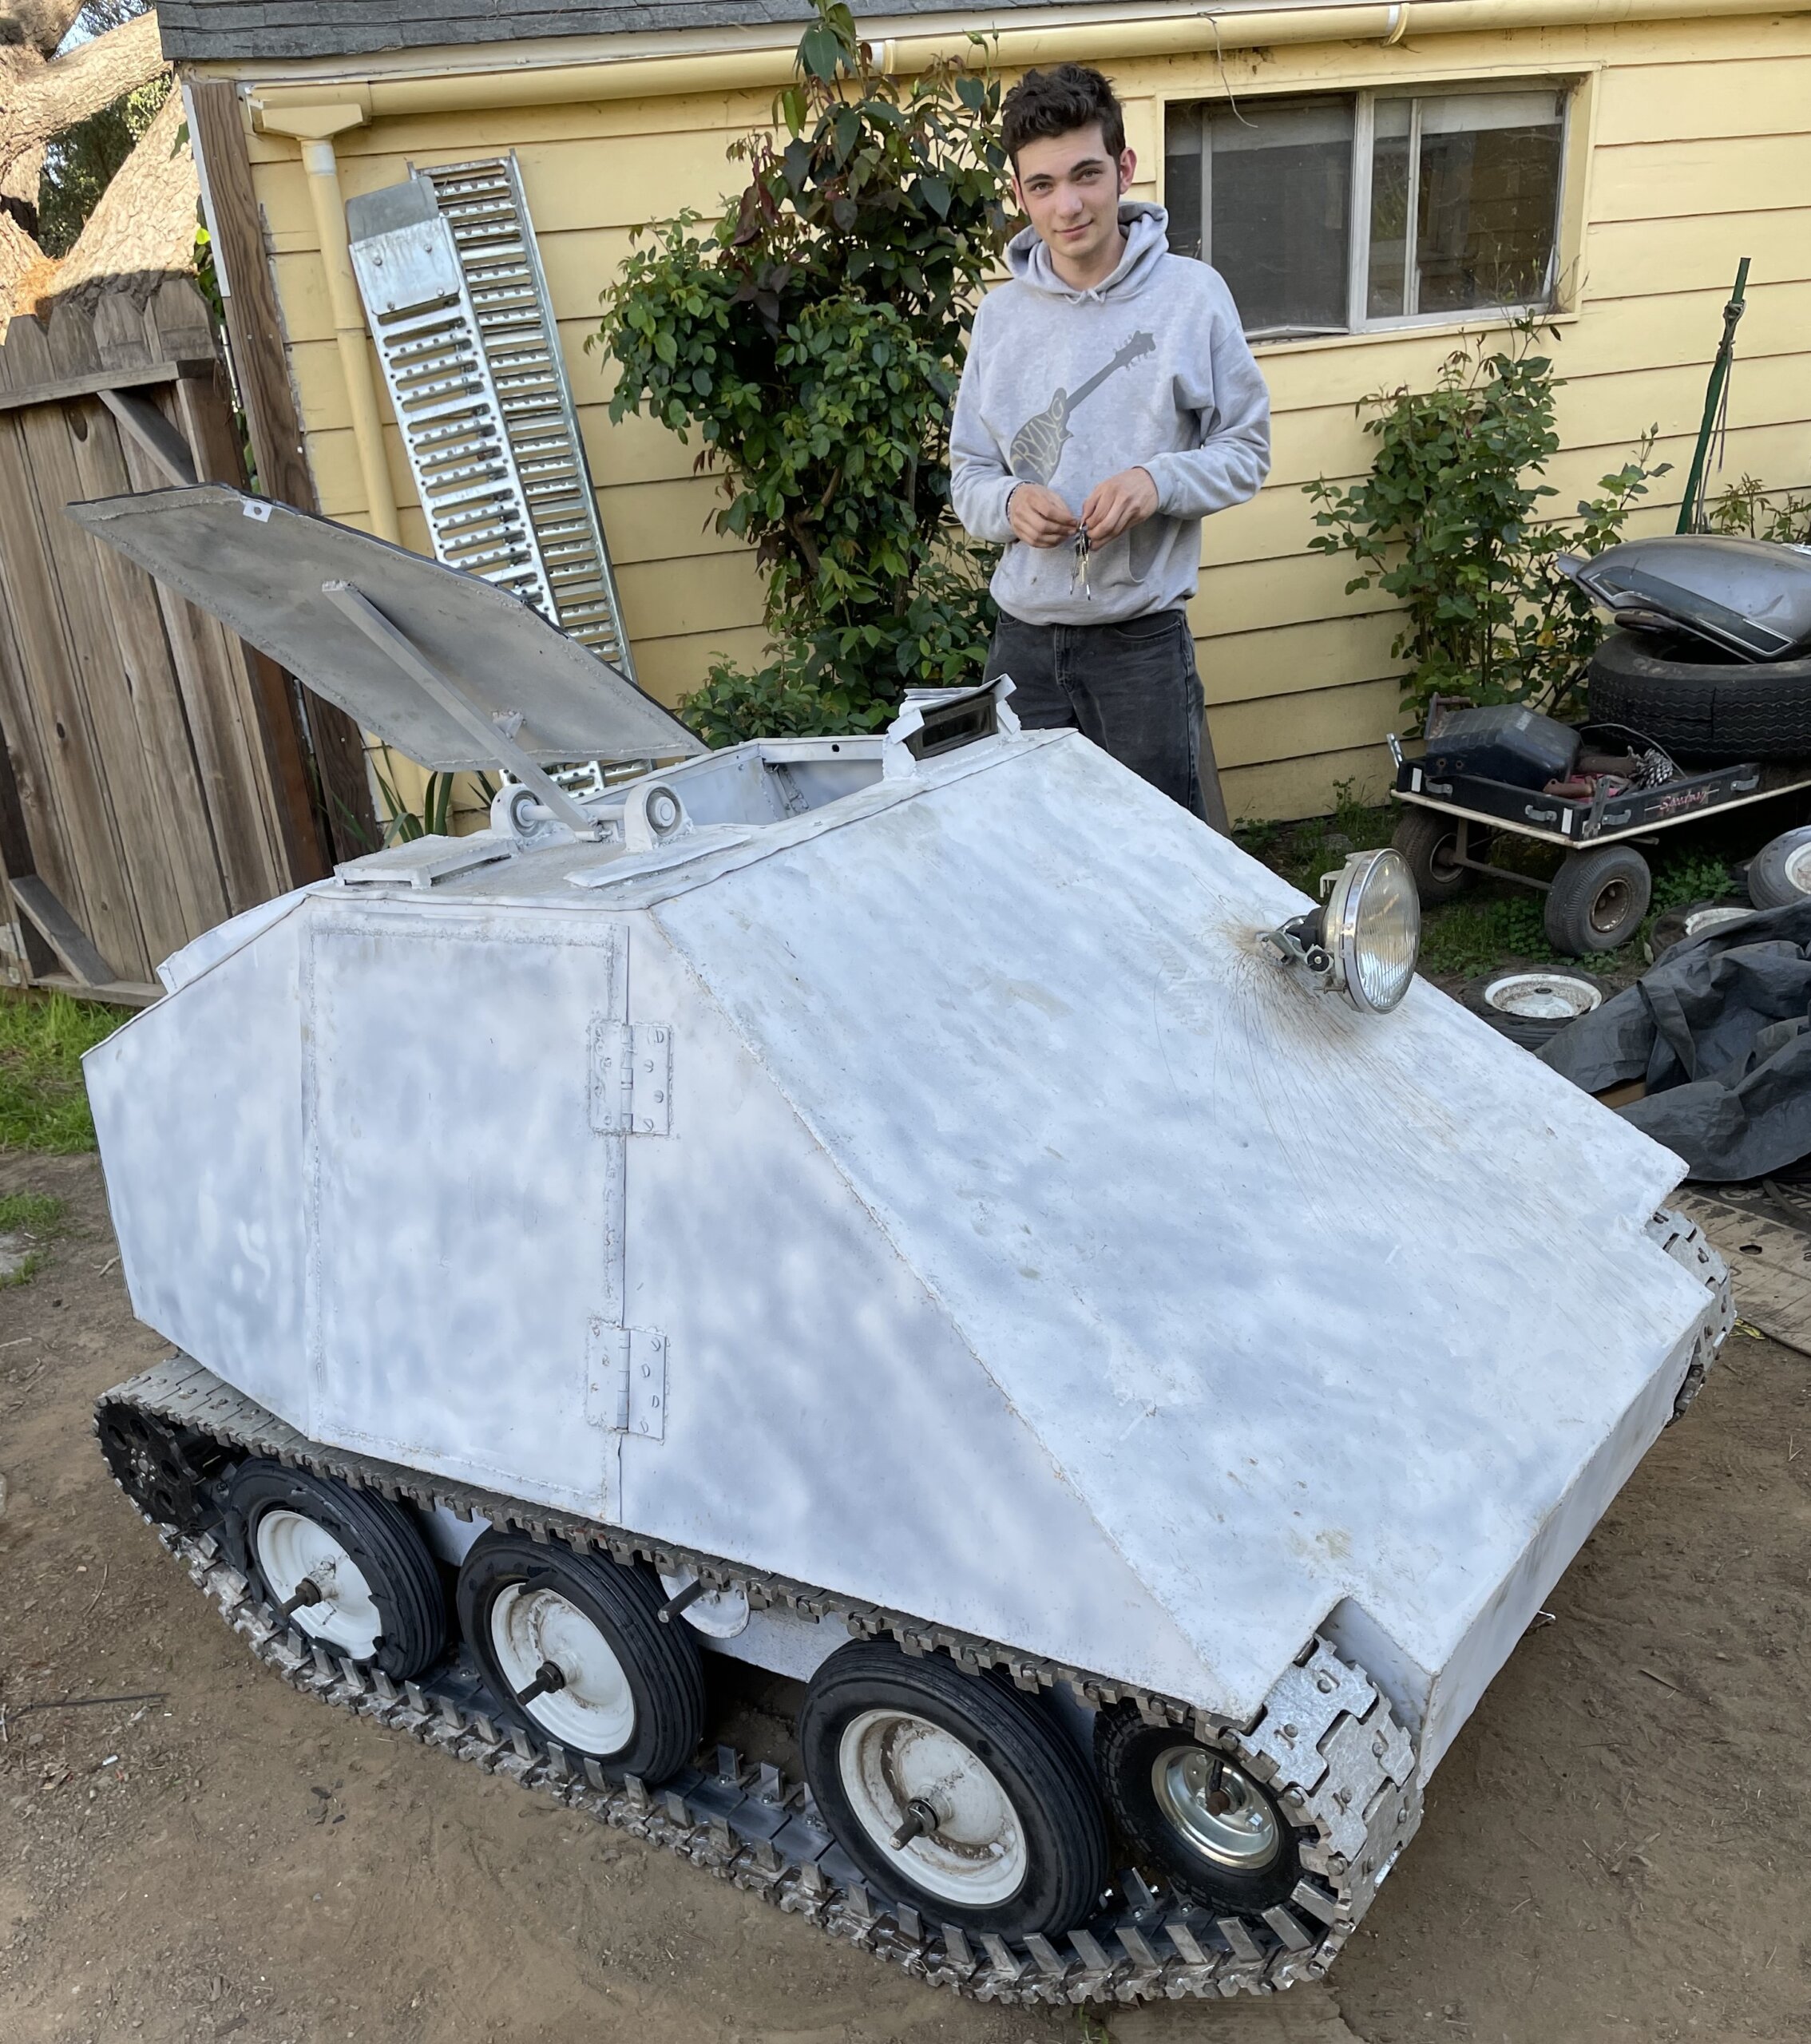 Andrew Osborn stands next to a tank he constructed